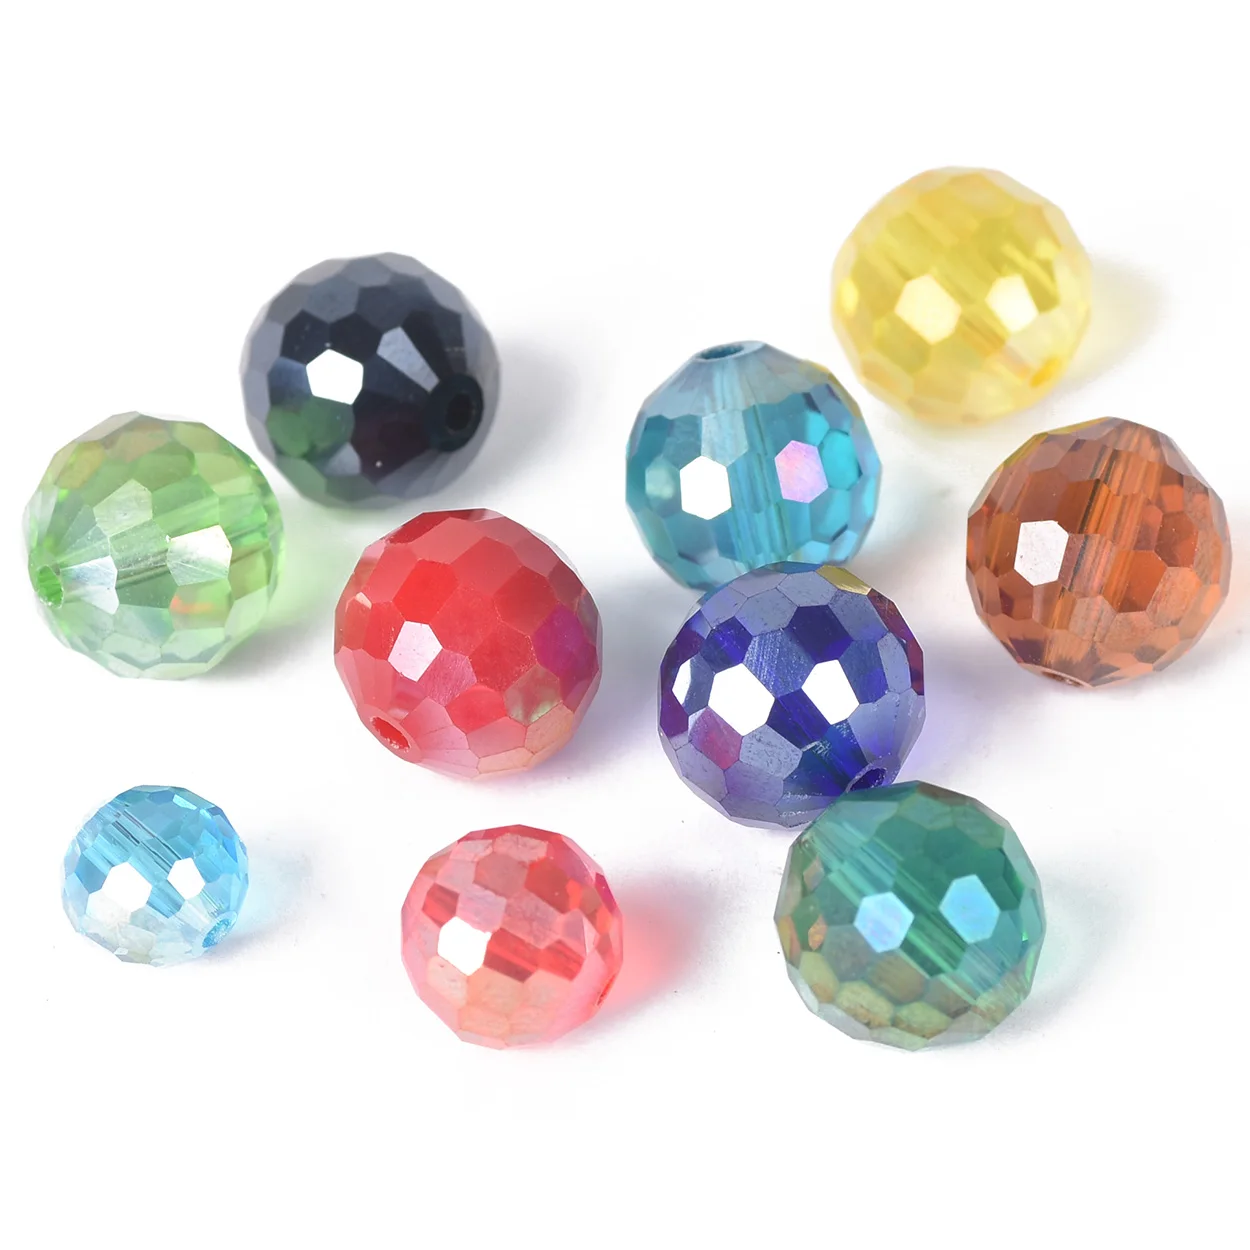 Round 96 Facets Cut Disco Ball AB Plated 6mm 8mm 10mm 12mm Crystal Glass Loose Spacer Beads lot Colors for Jewelry Making DIY